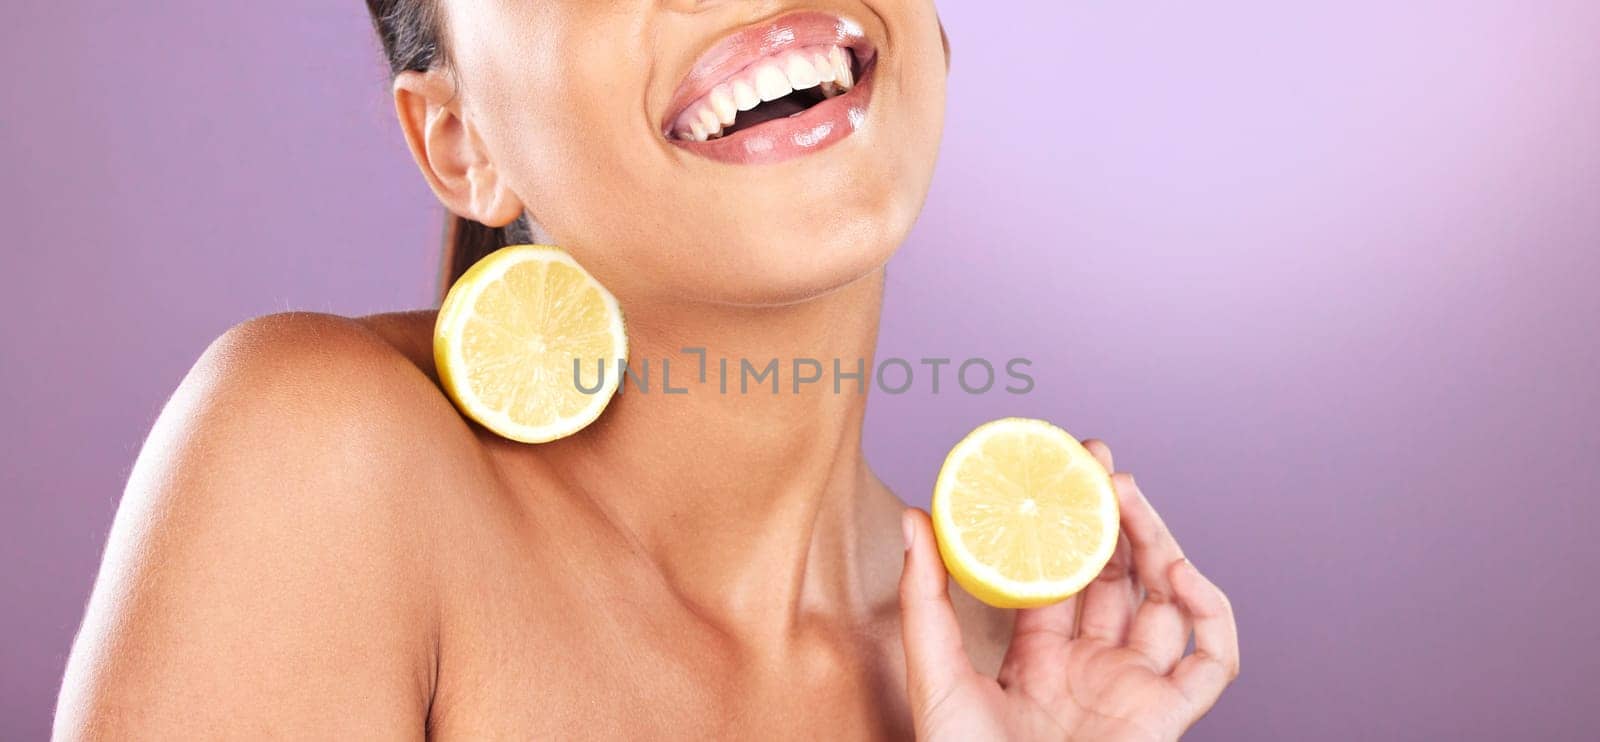 Woman, face skincare or lemon product on purple studio background for organic dermatology, healthcare diet wellness or self care grooming. Zoom, smile or happy beauty model and fruit facial cosmetics.